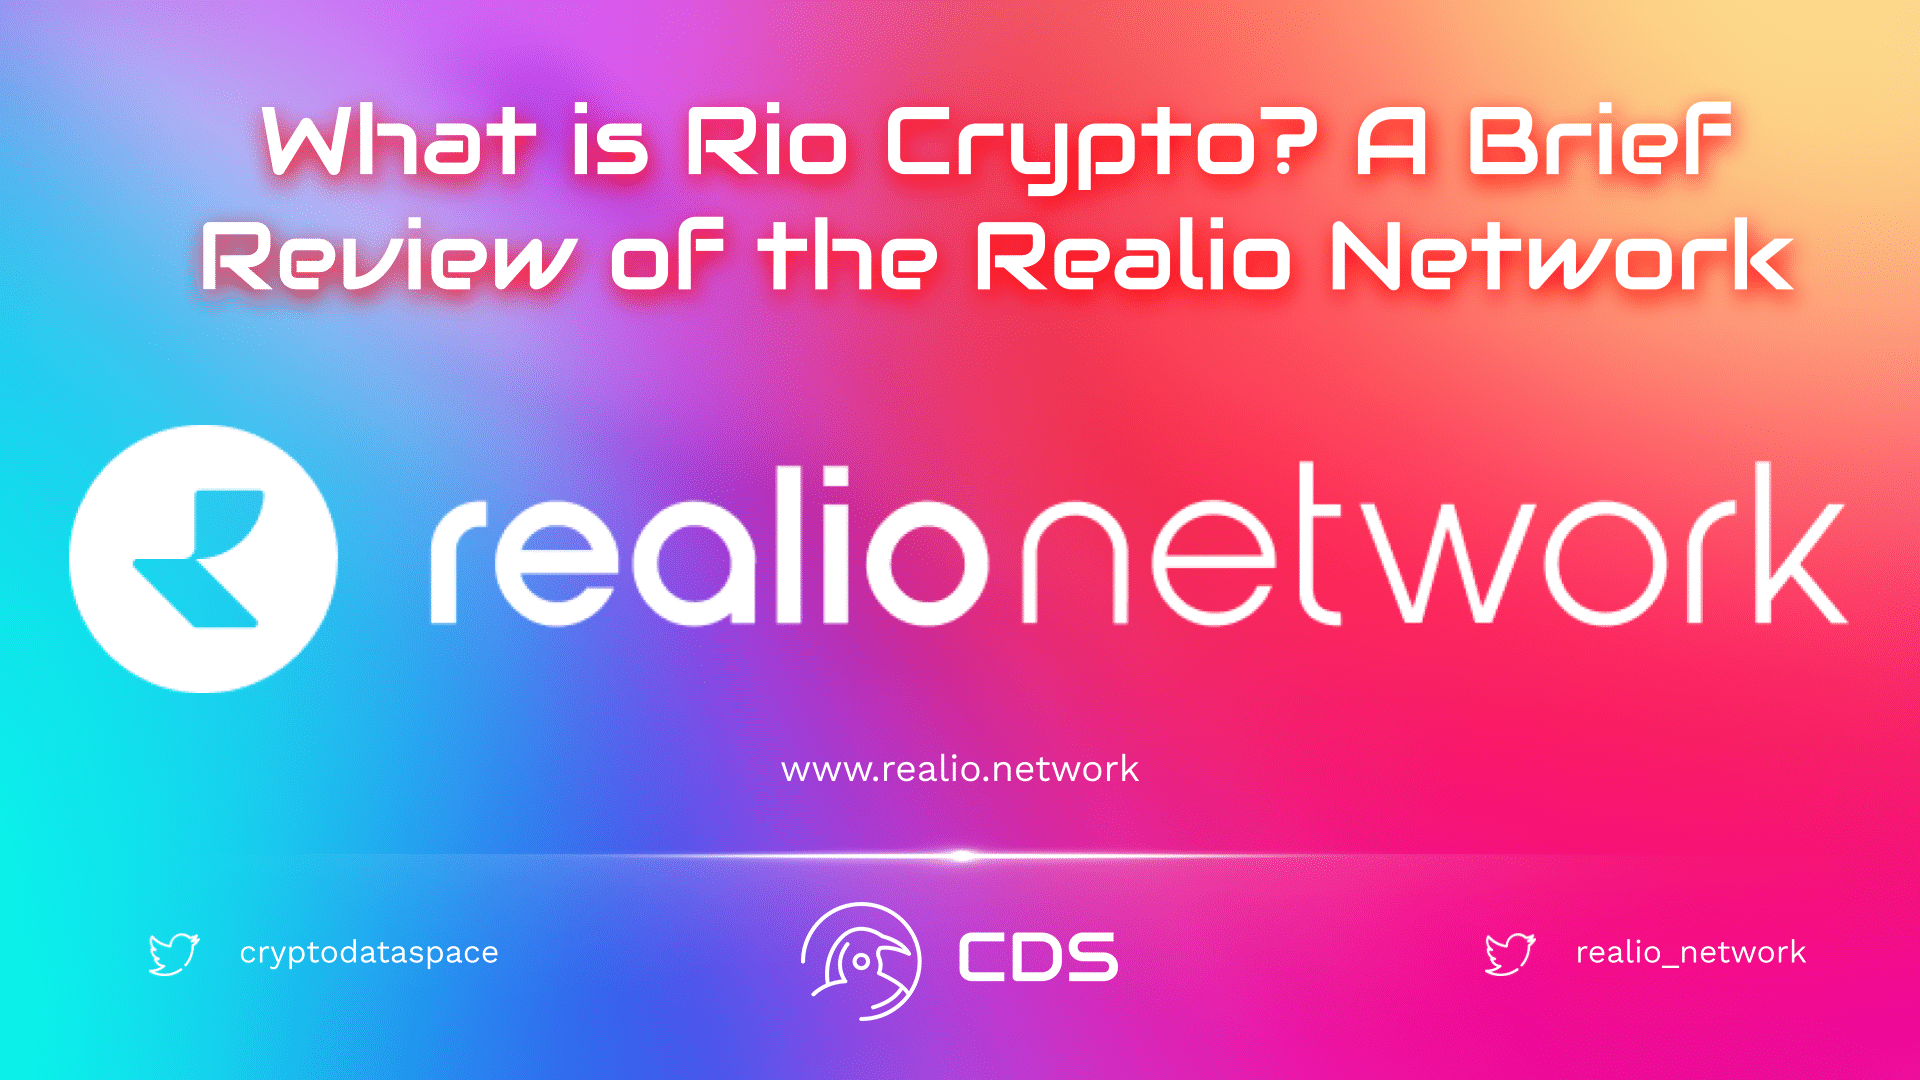 What is Rio Crypto A Brief Review of the Realio Network